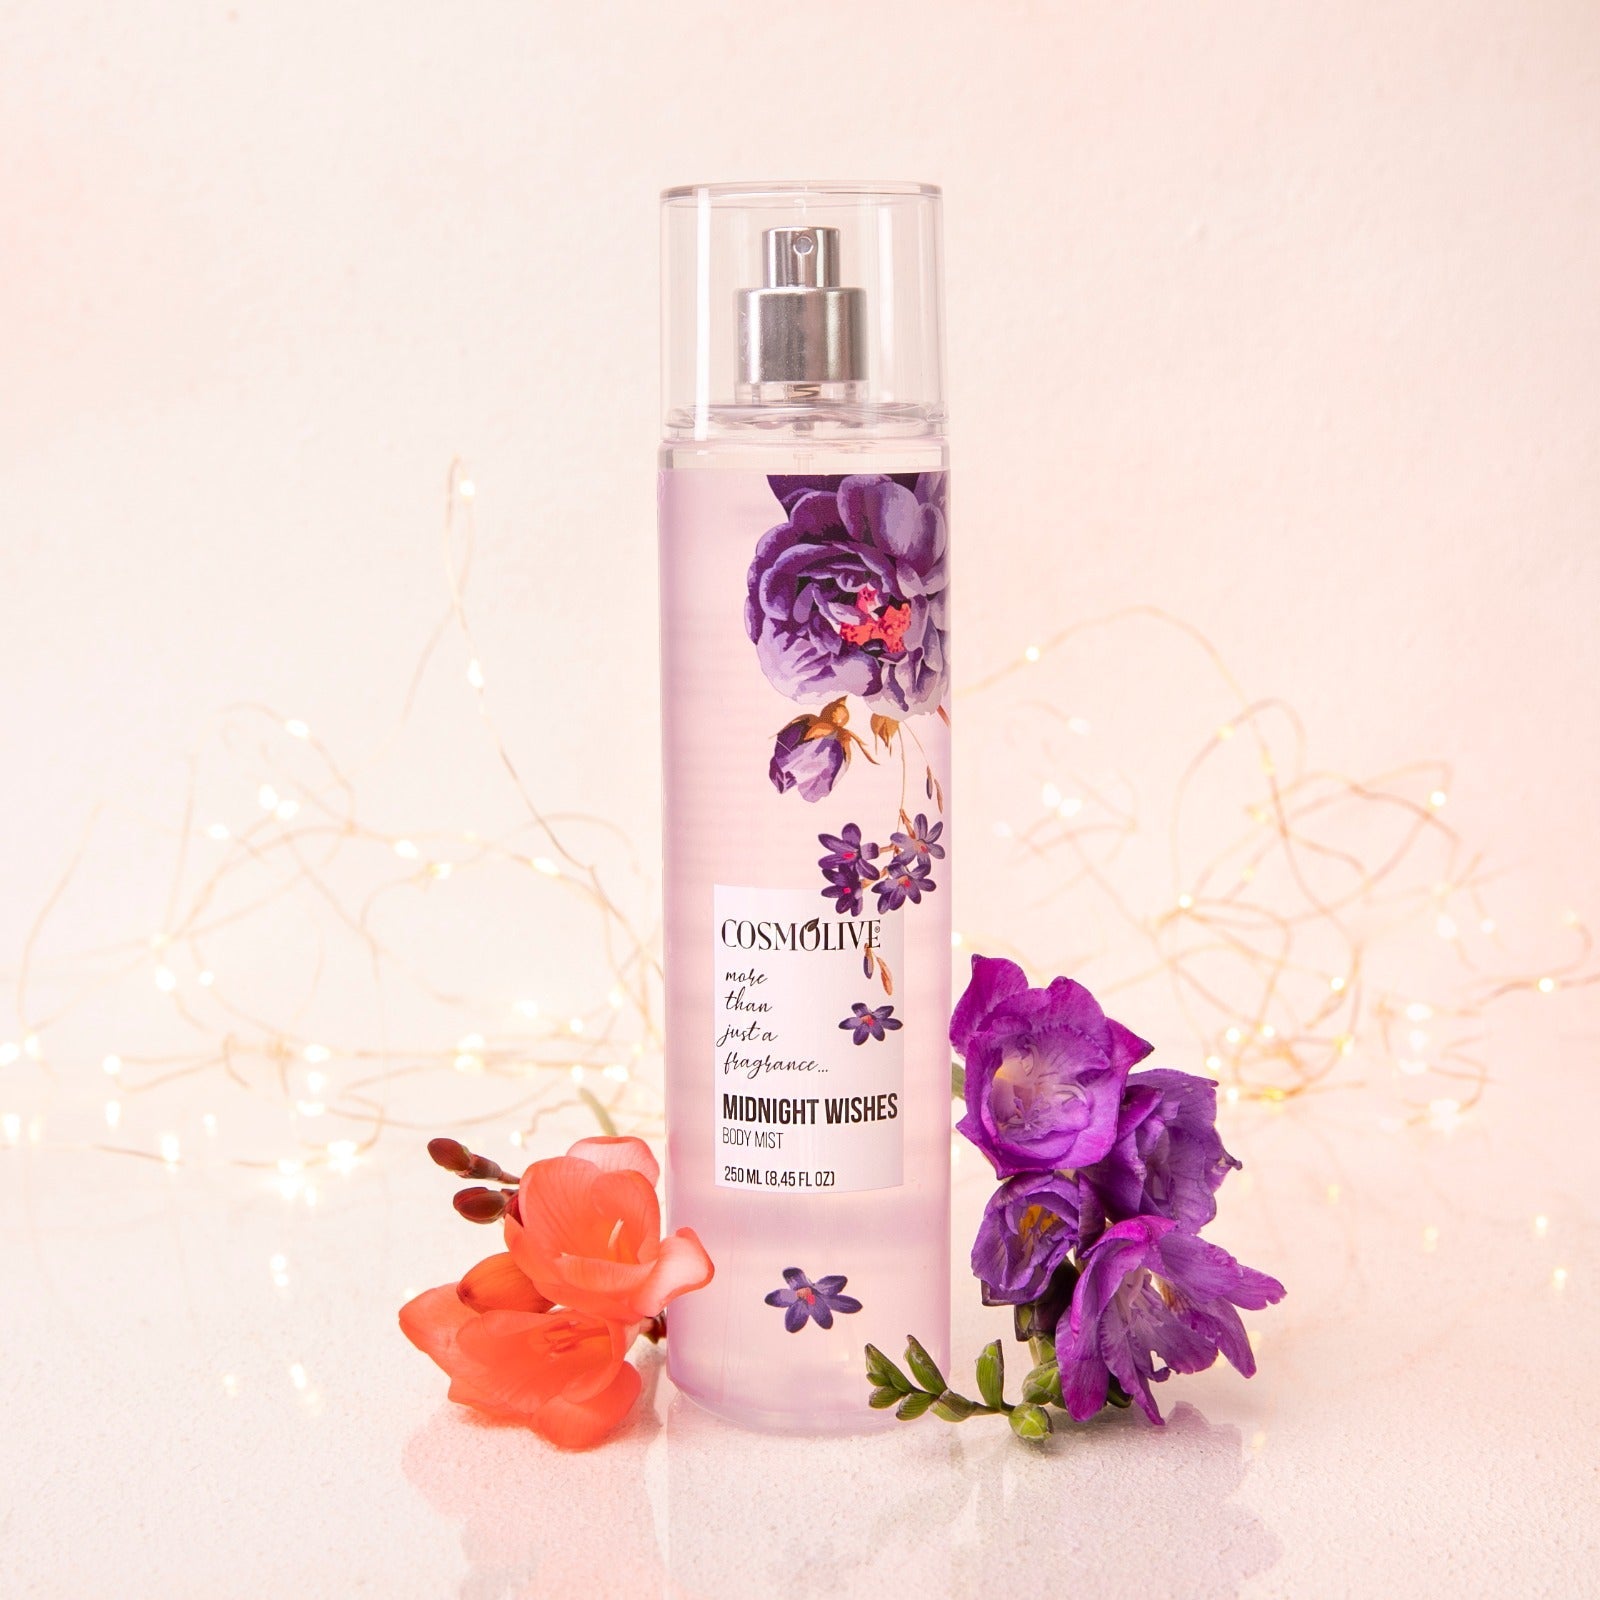 COSMOLIVE BODY MIST 250 ml Midnight Wishes / The Excellent Composition of Nature With the Fruit and Floral Essences / Natural Life - Natural Bazaar